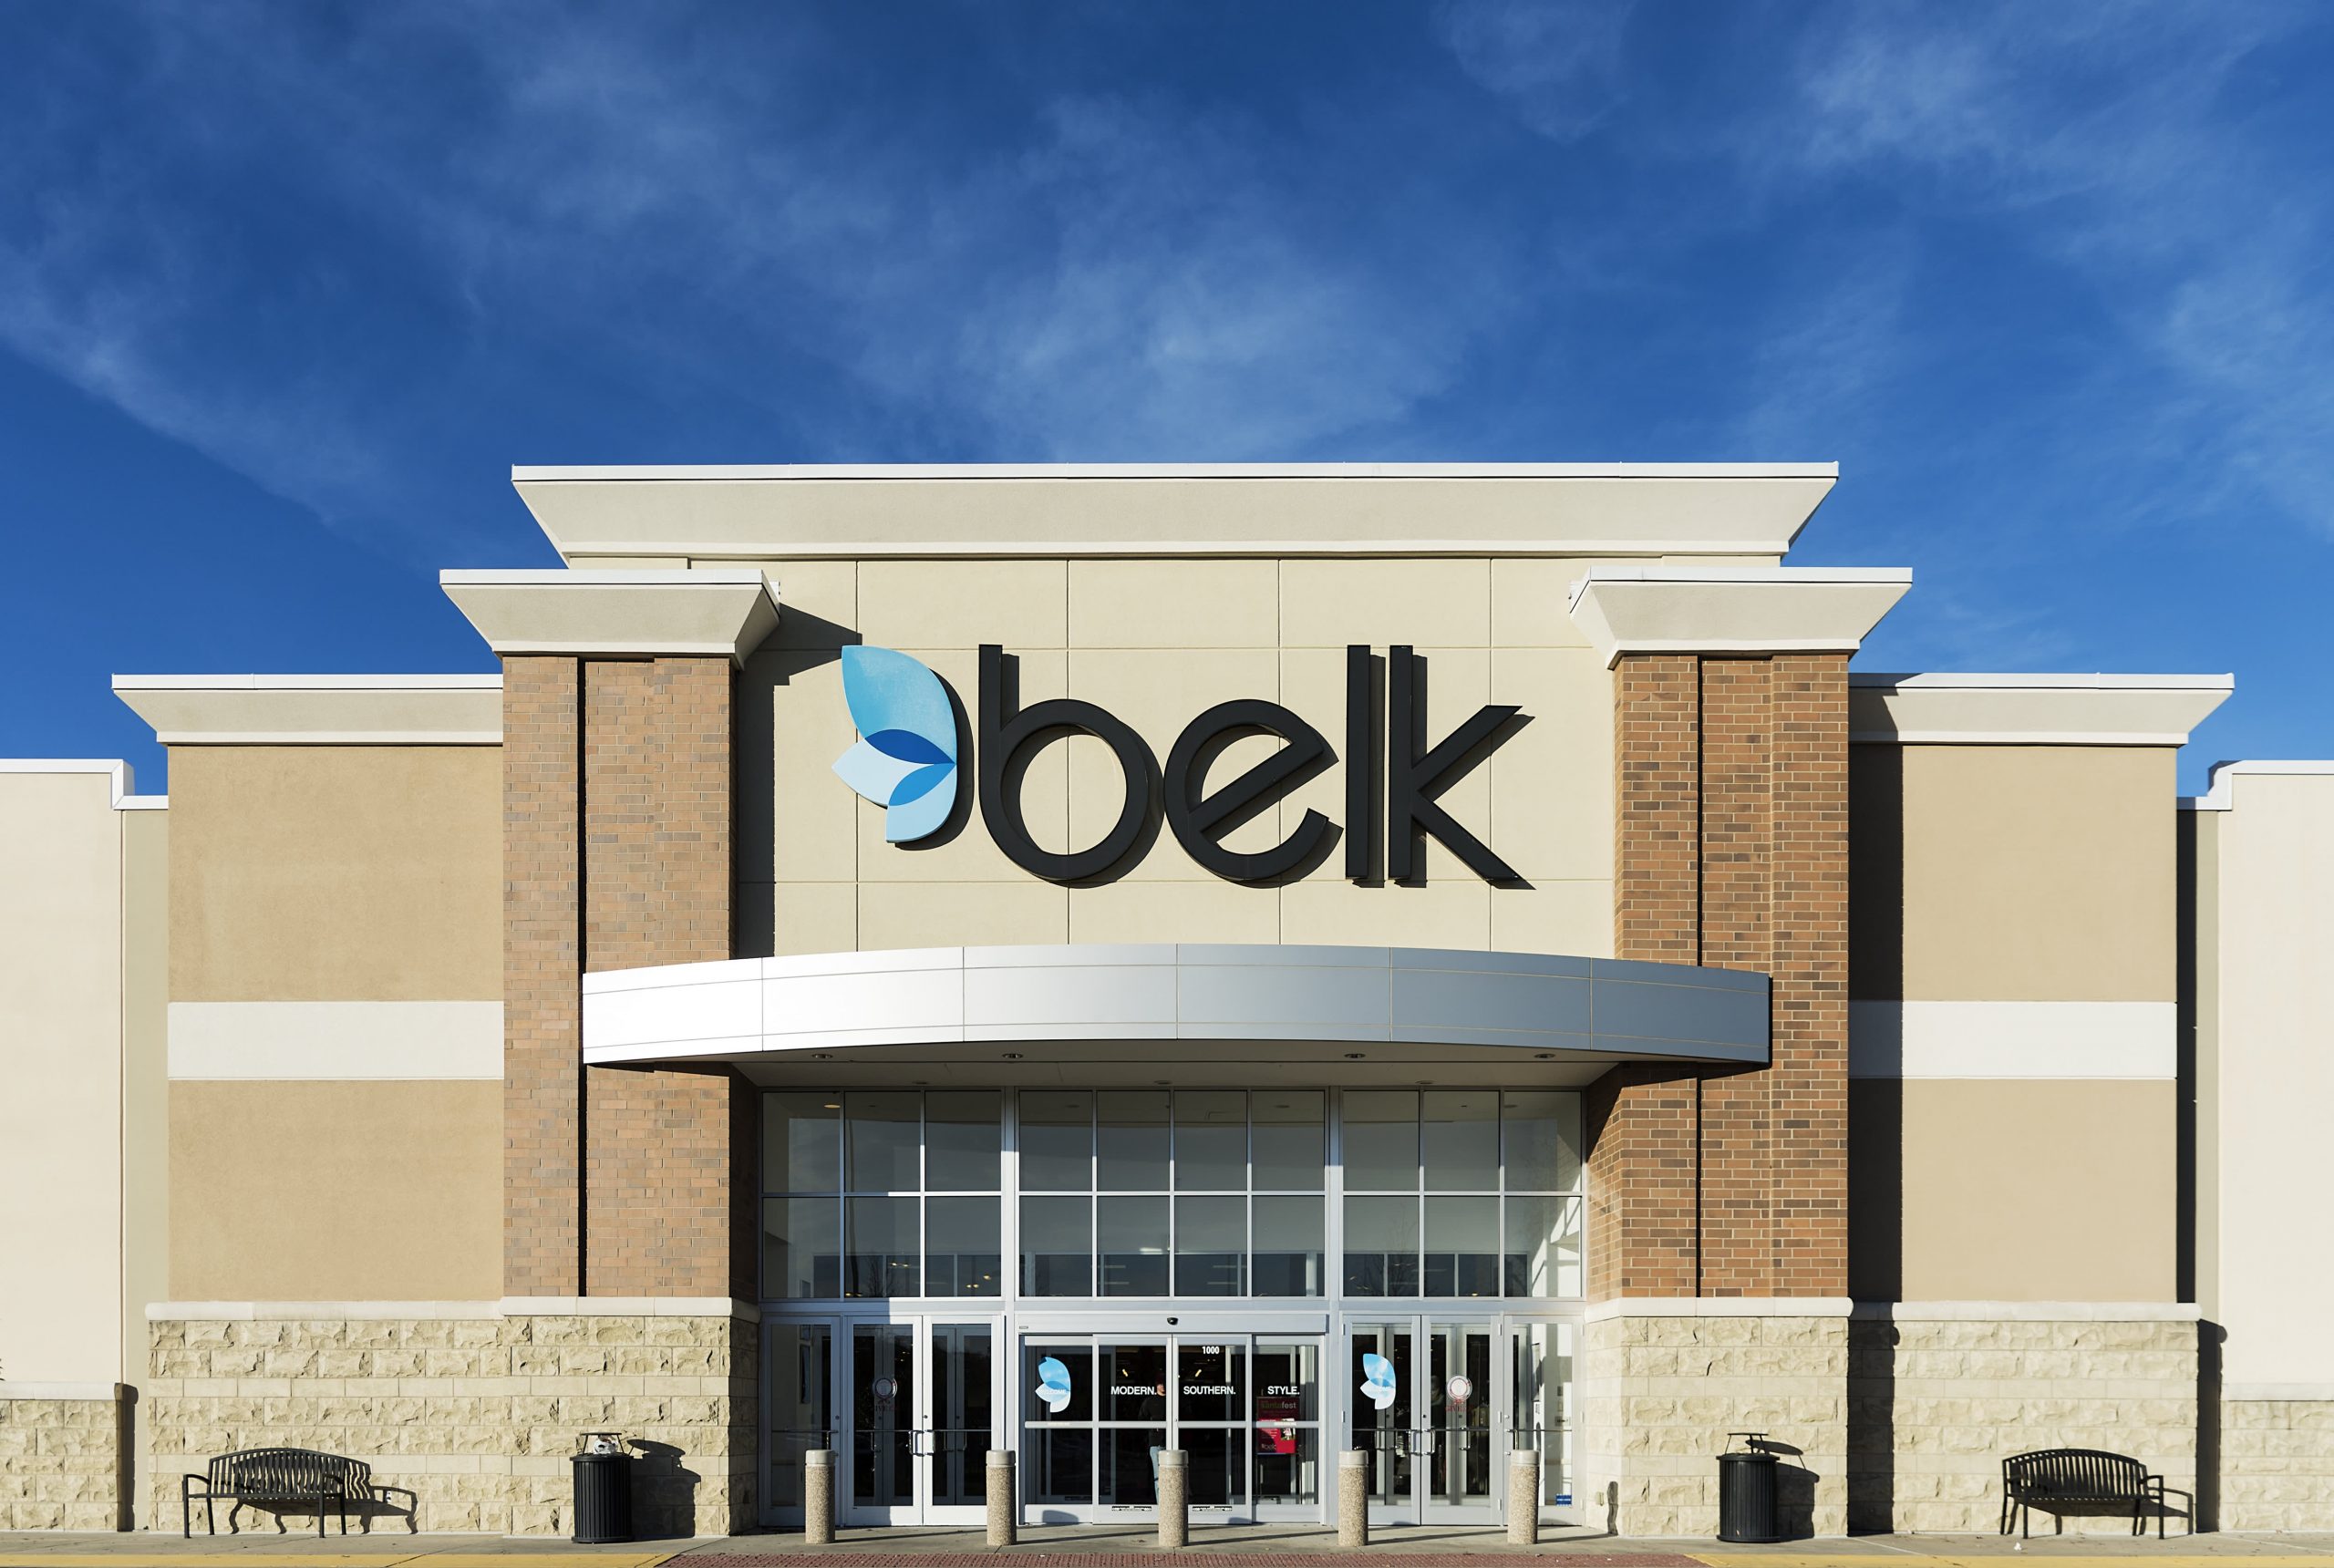 Belk Lenders Are Looking To Avoid Taking A Retailer Through Bankruptcy: WSJ